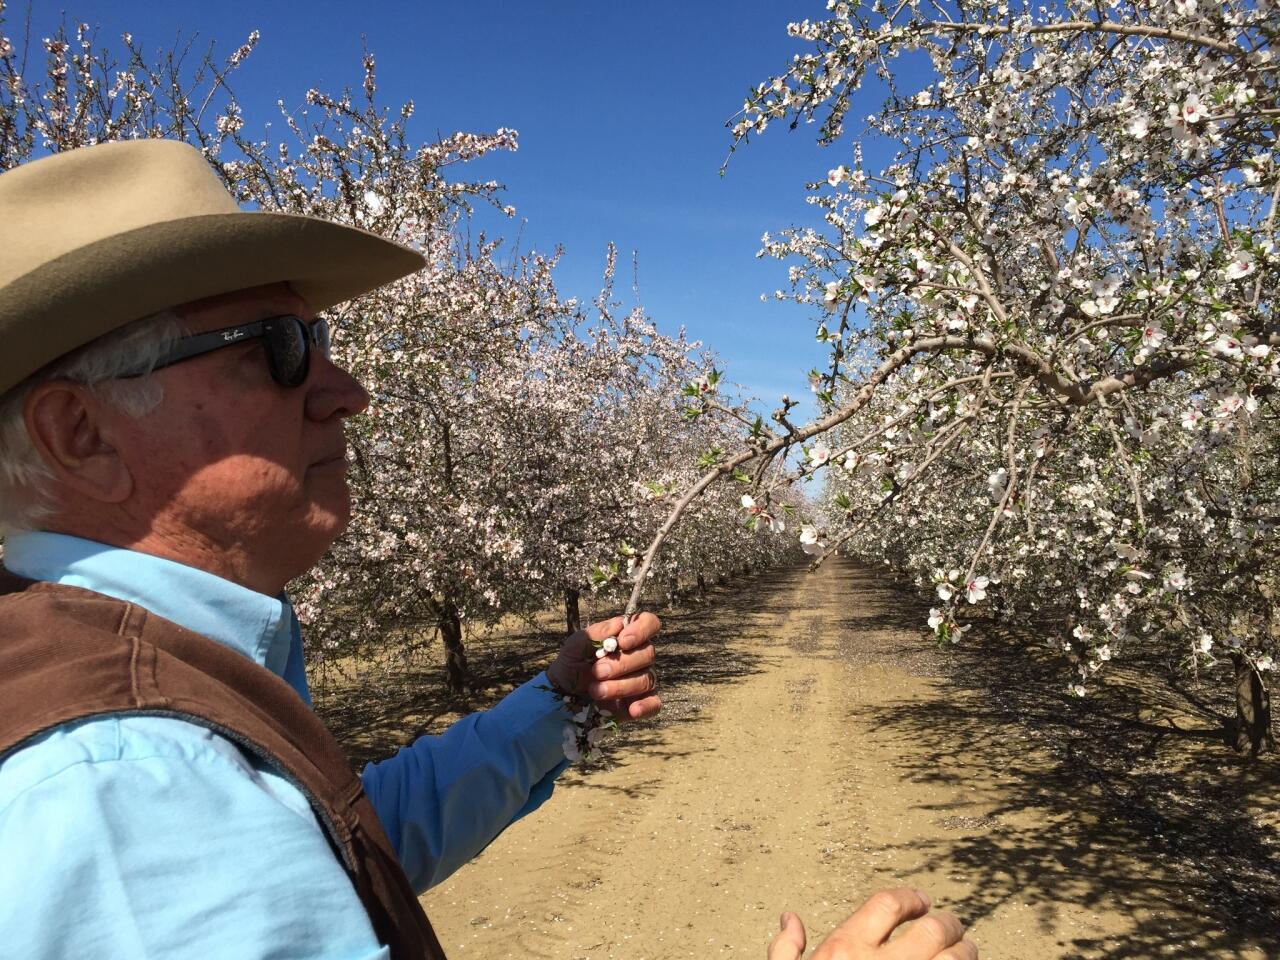 Almond grower Joe Del Bosque holds the limb of a blossoming almond tree in one of his orchards. Once the blossoms fall off, carpeting the ground like snow, green leaves appear on the trees.